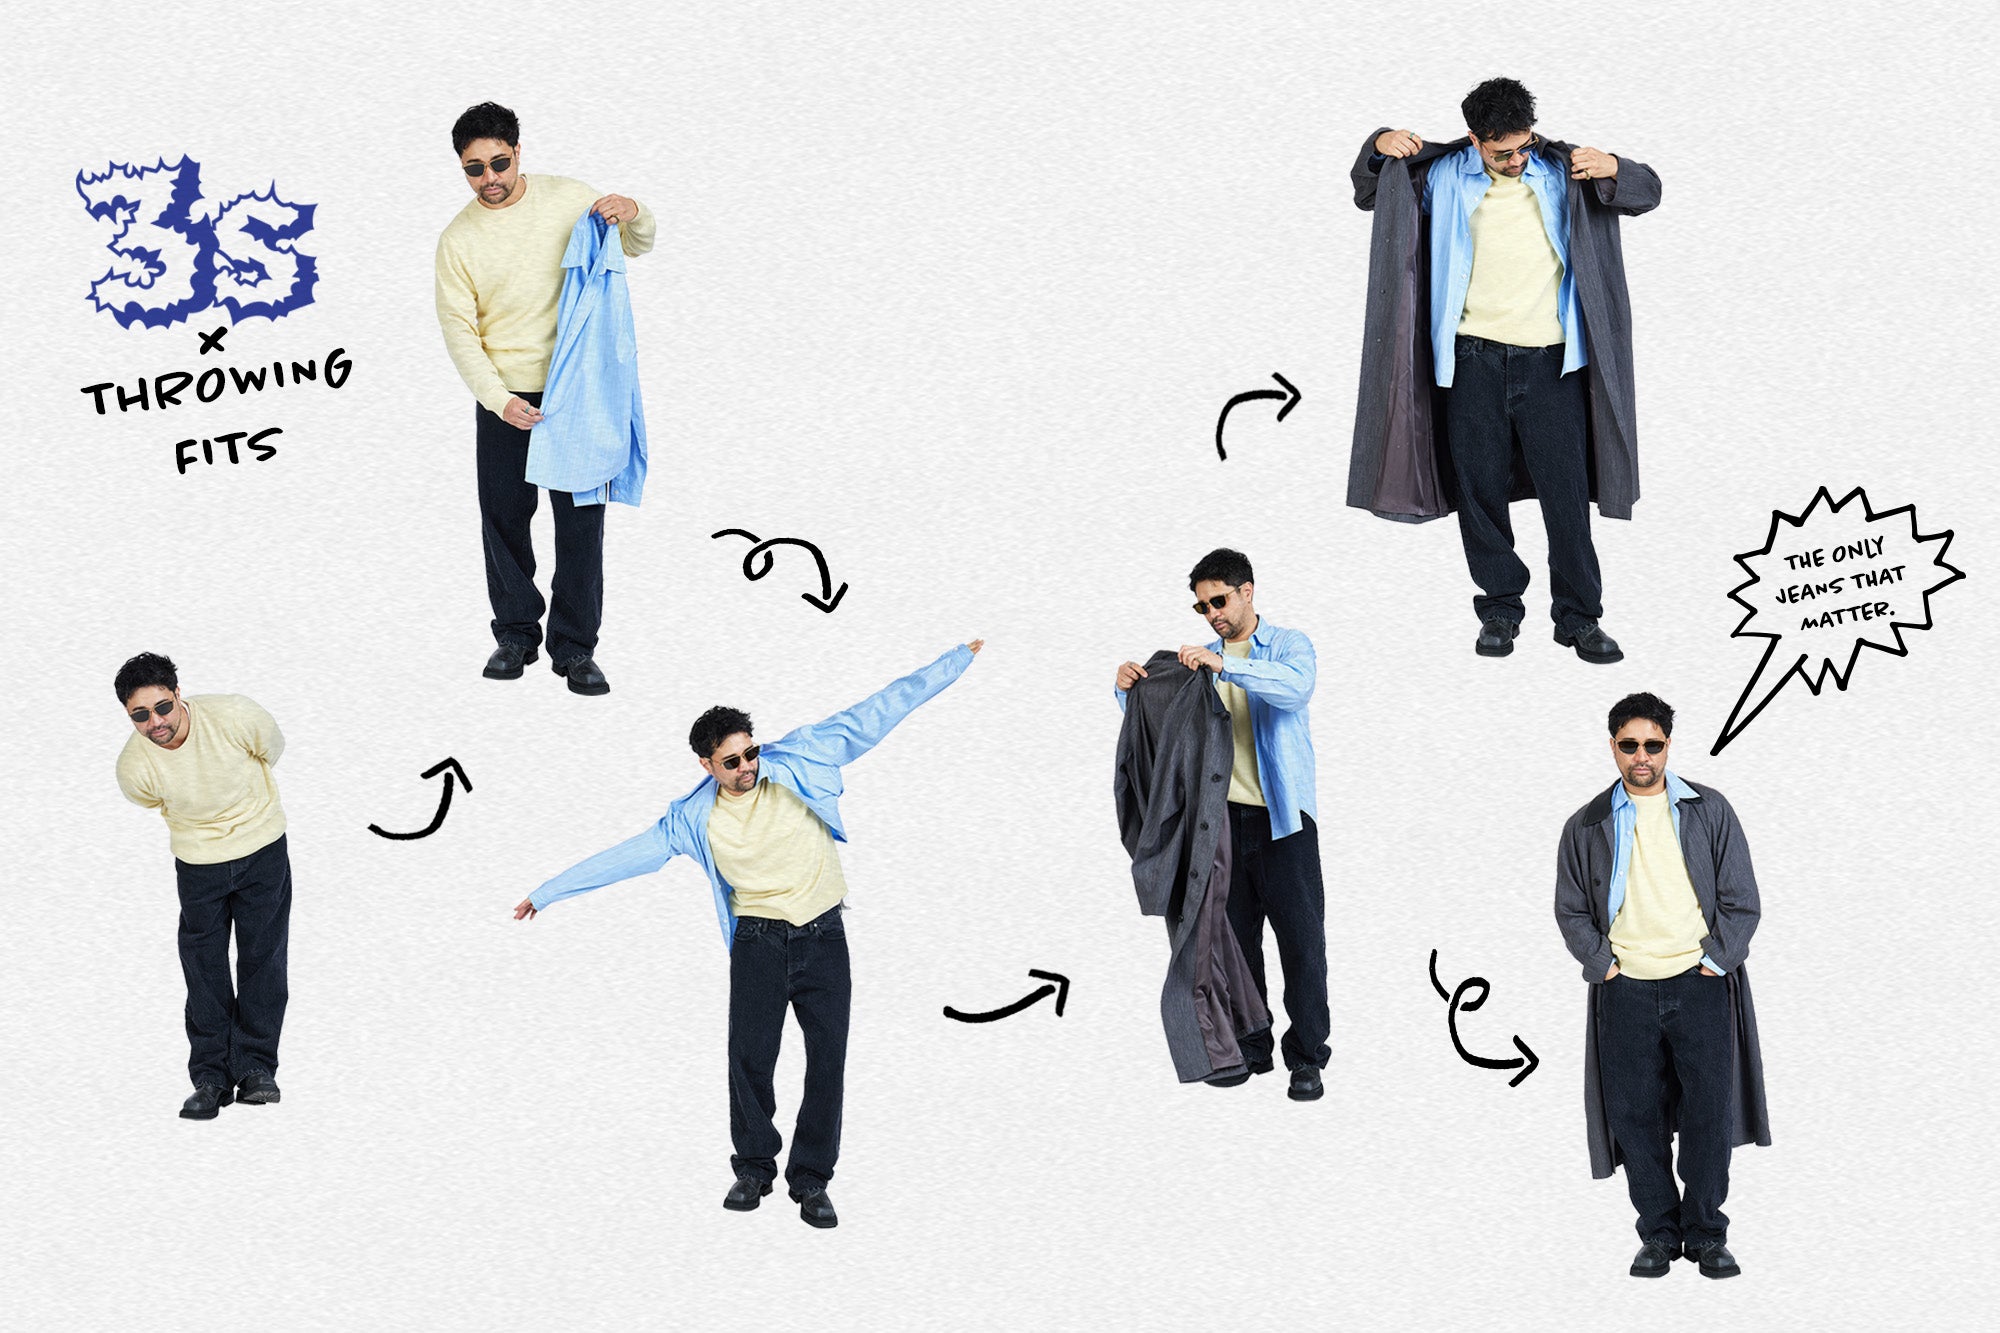 A layout of a man getting his photo taken while getting dressed in a yellow sweater and black jeans.